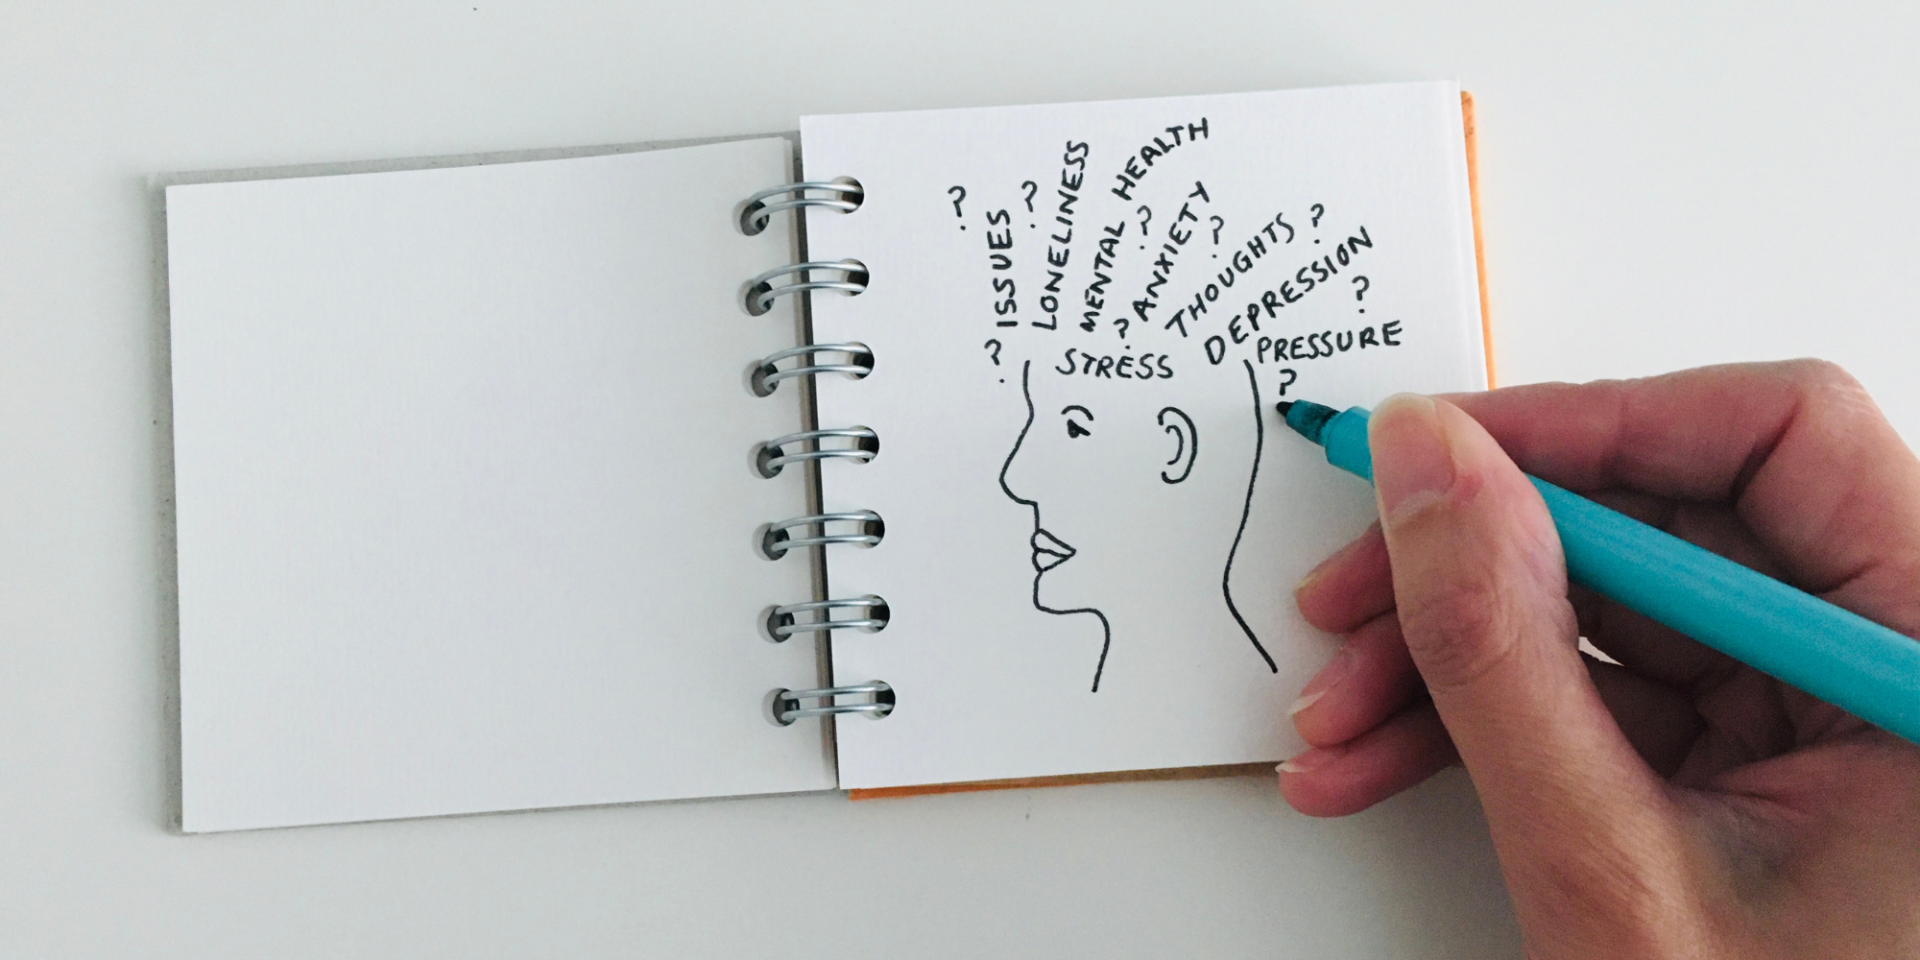 Drawing of brain in notepad surrounded by written words associated with mental health